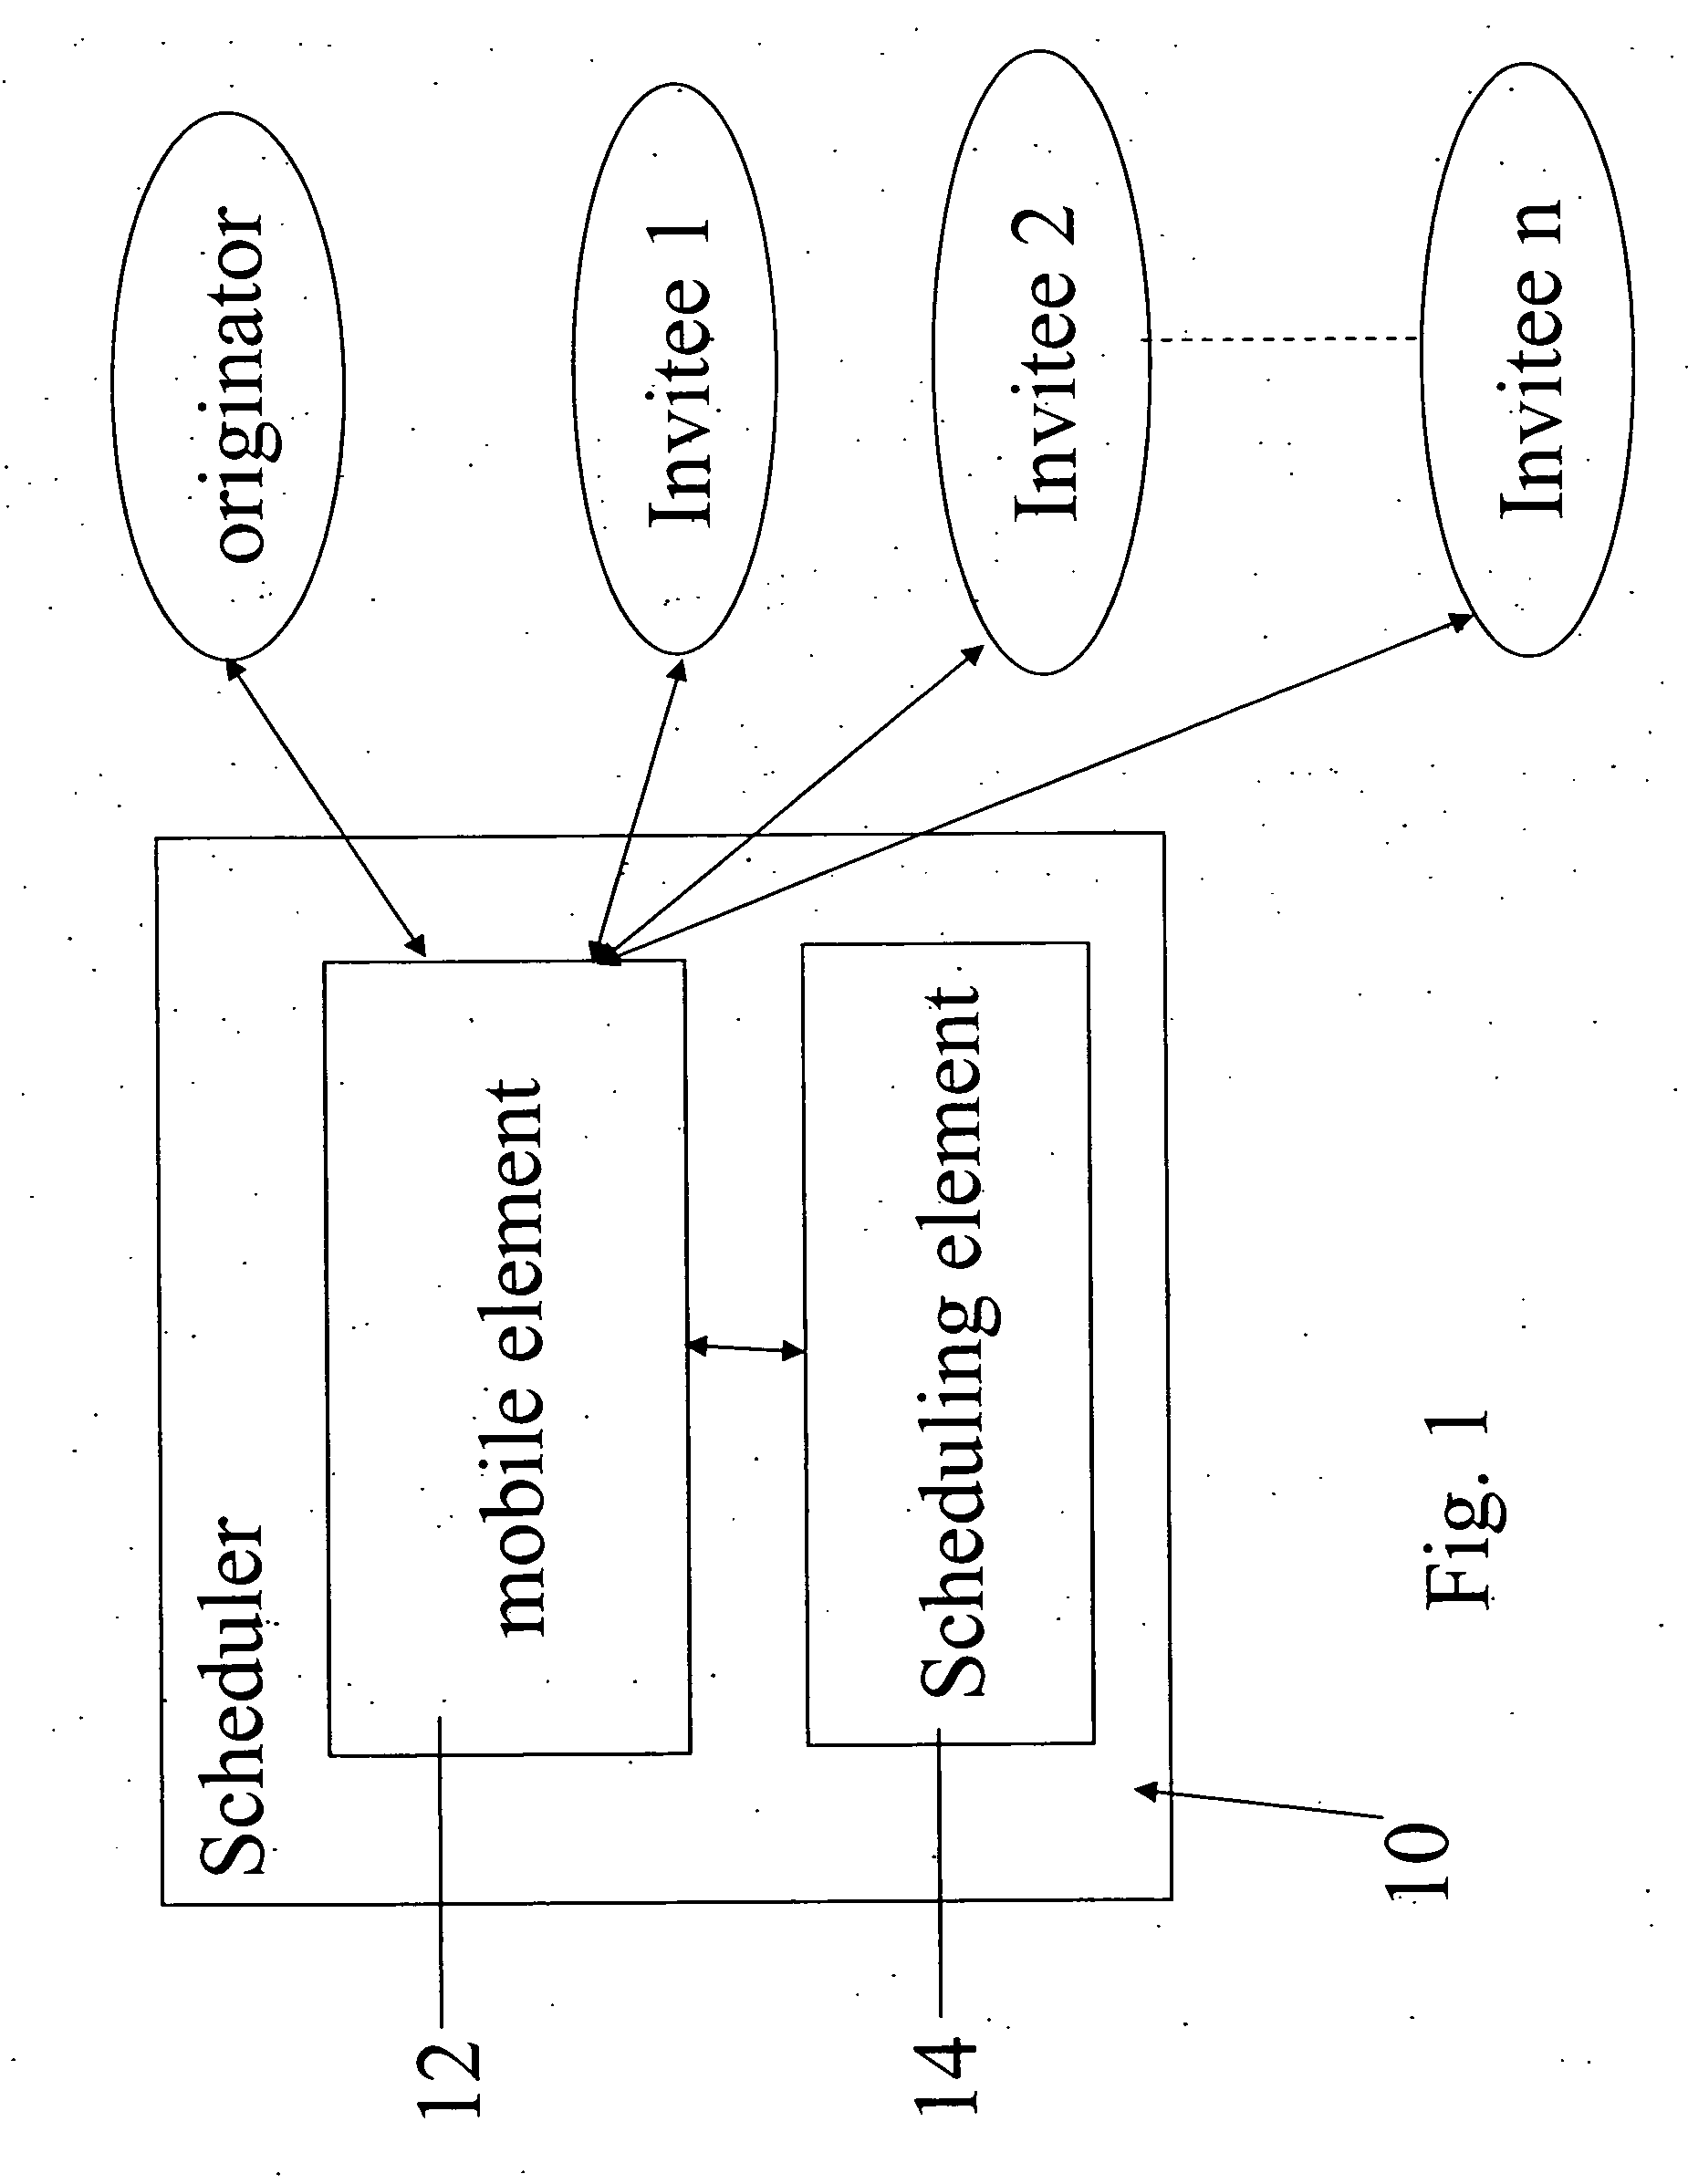 Automatic scheduling method and apparatus